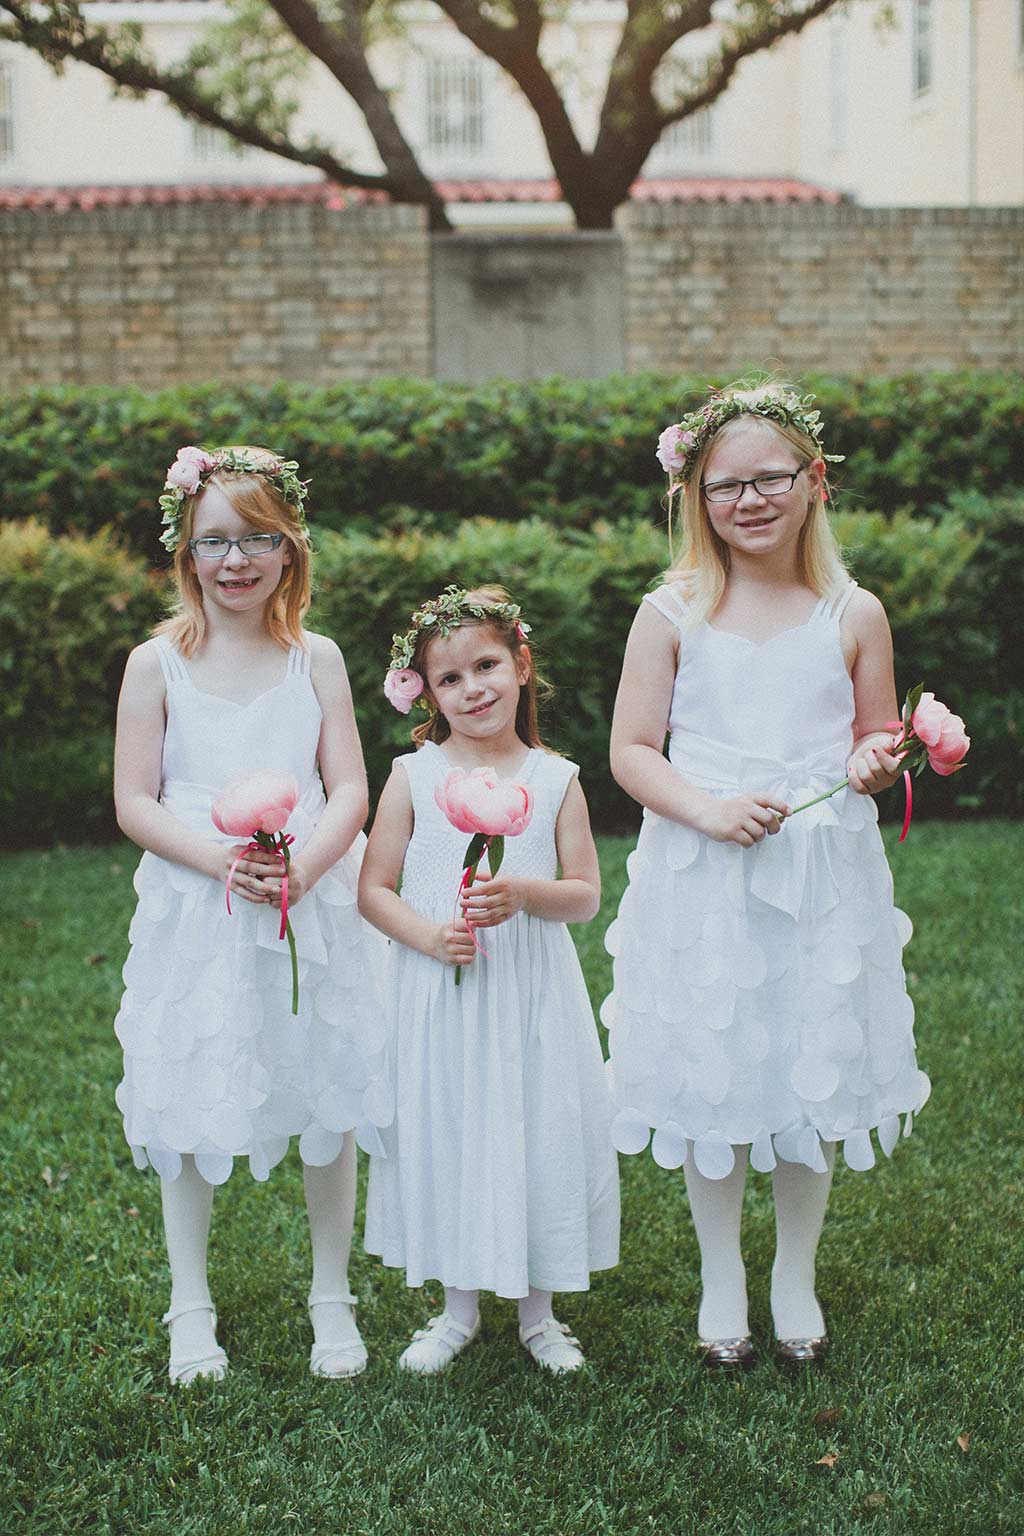 Flower Girls with Floral Head Wreaths